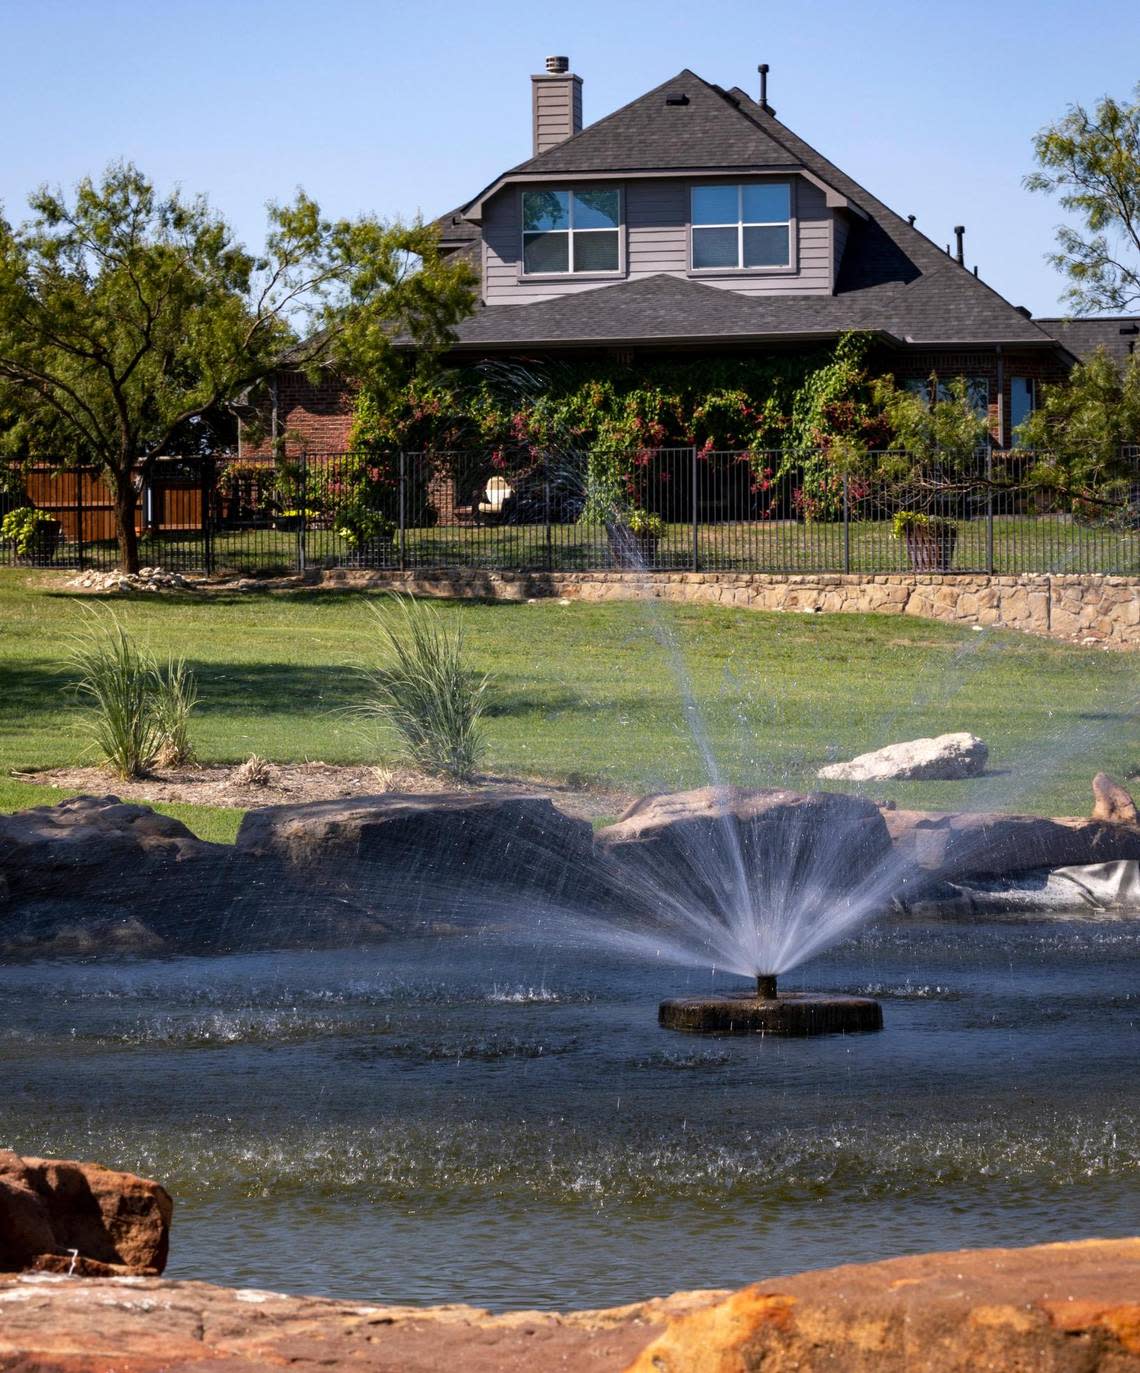 Homes spread across the 1,000-acre Marine Creek Ranch neighborhood in Fort Worth on Thursday, Sept. 15, 2022. 5,965,000 Texans belong to homeowners associations.